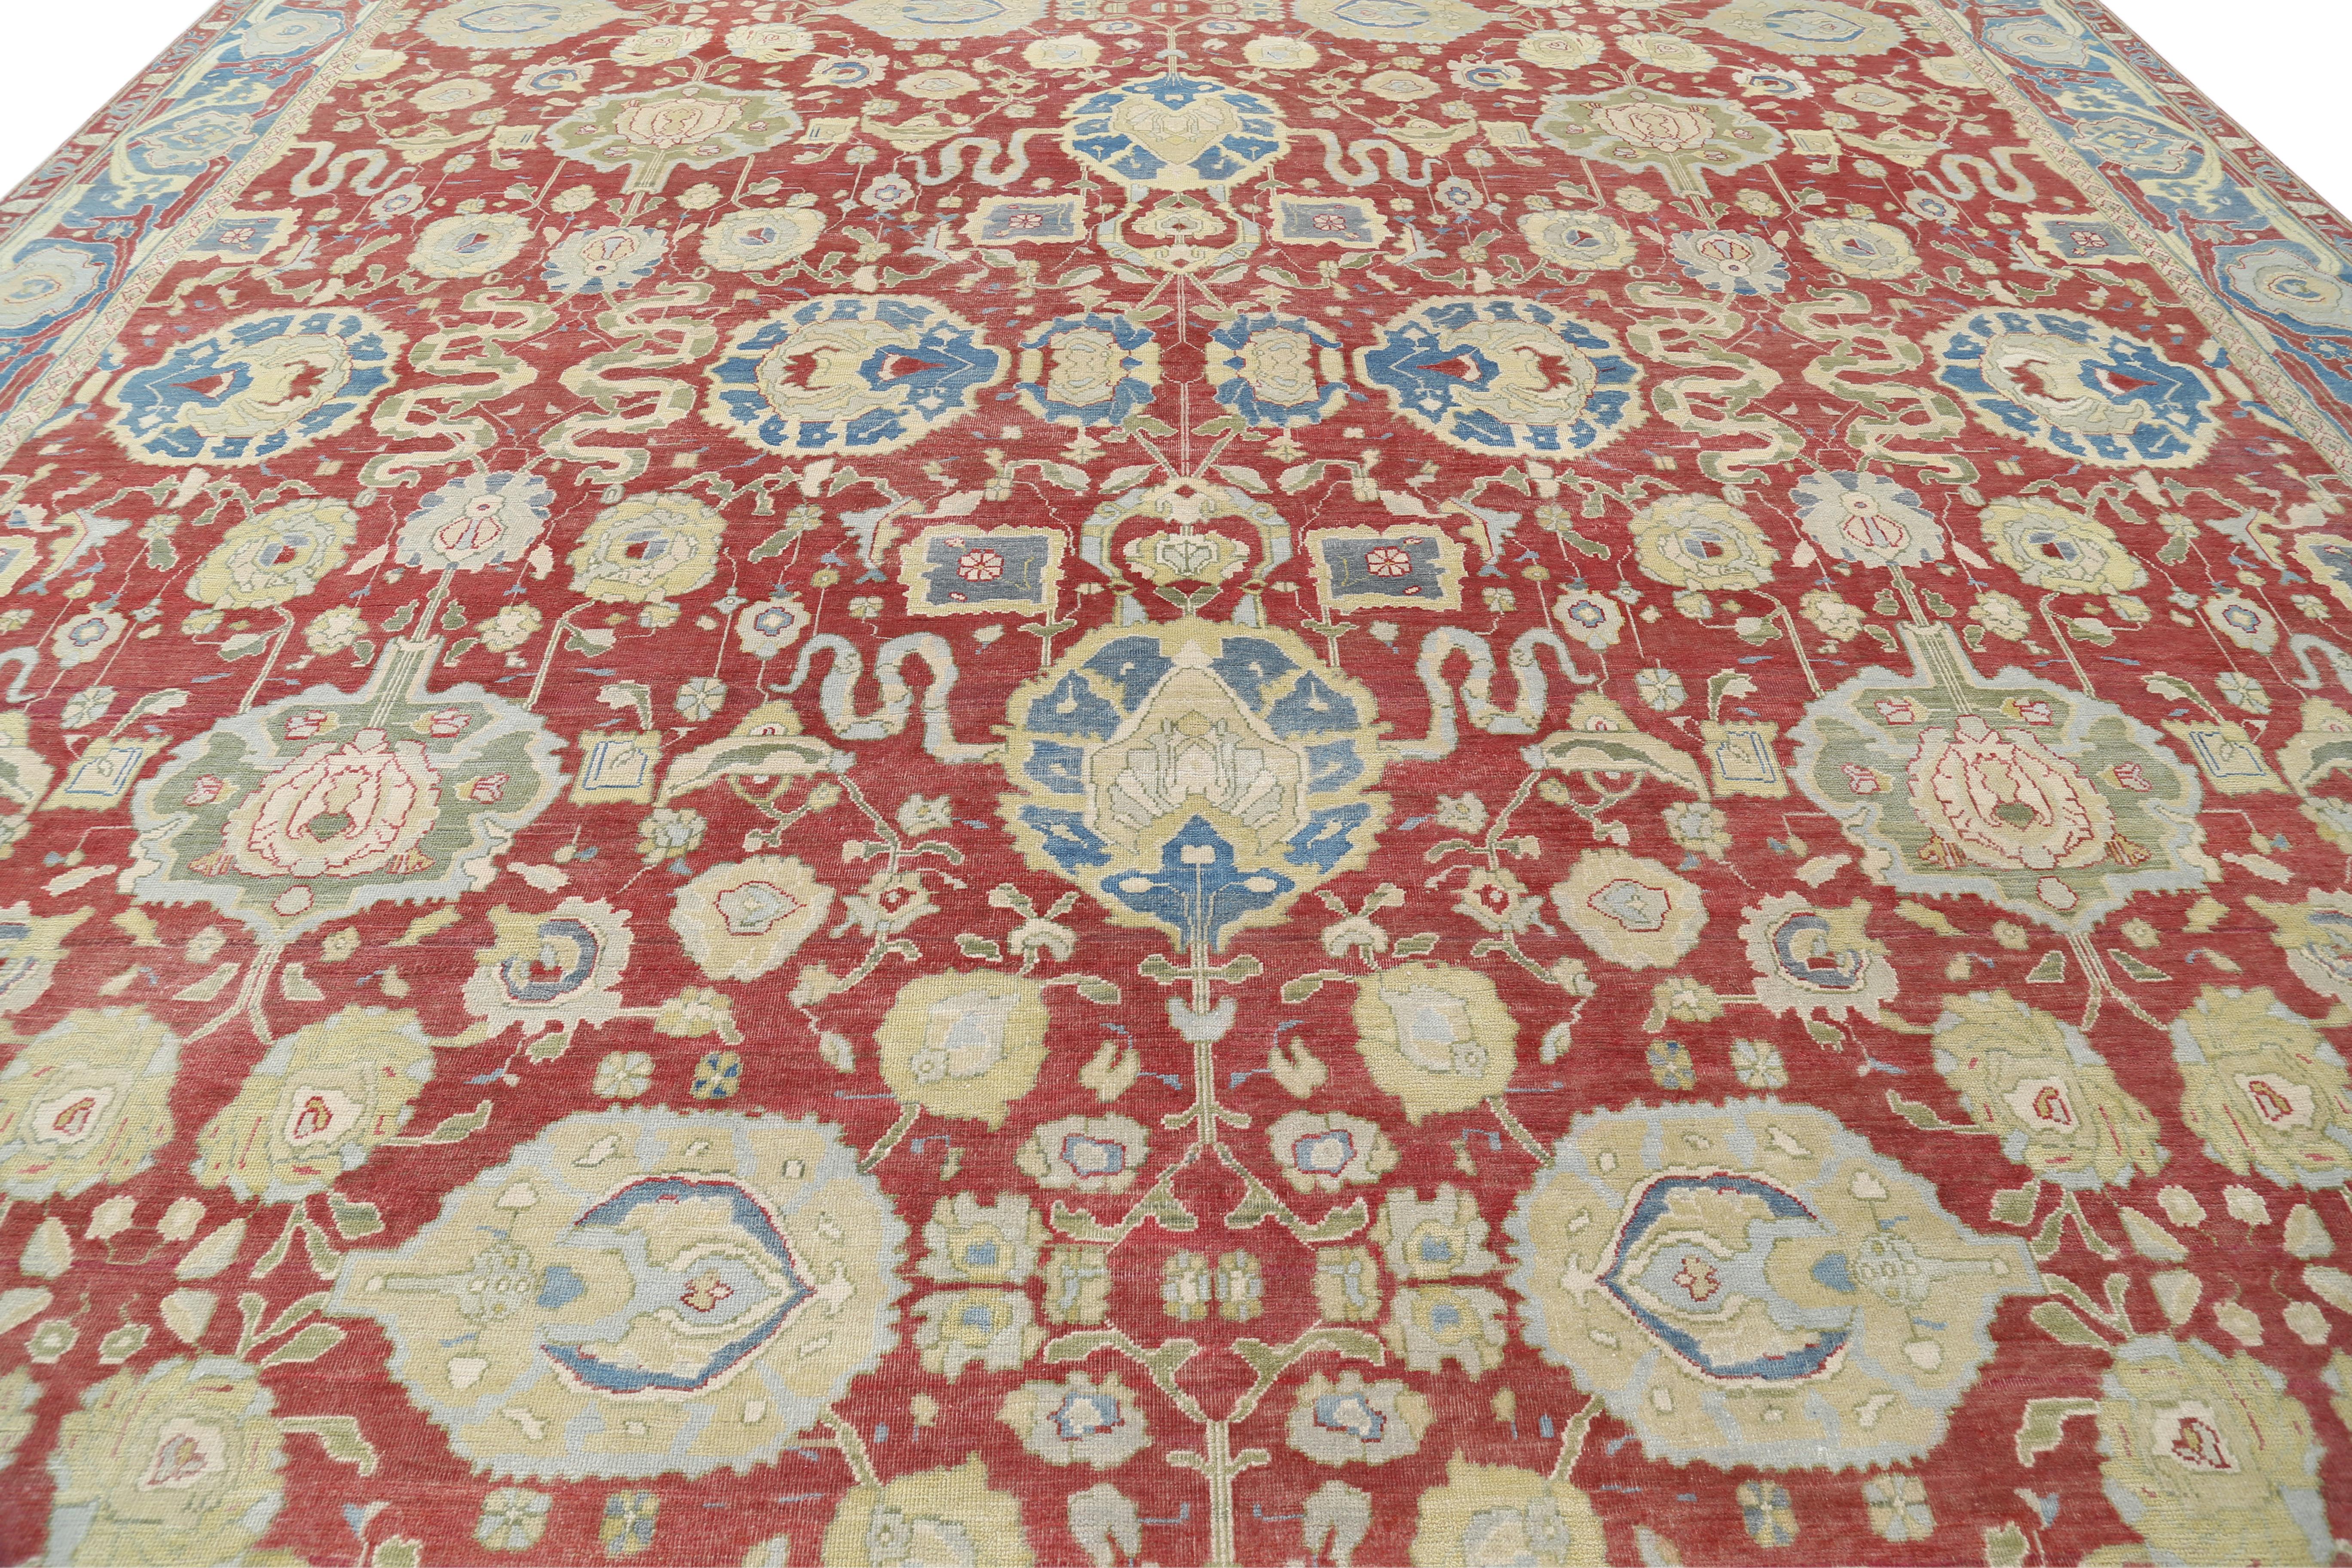 20th Century Indian Agra Carpet  In Excellent Condition For Sale In Gainesville, VA